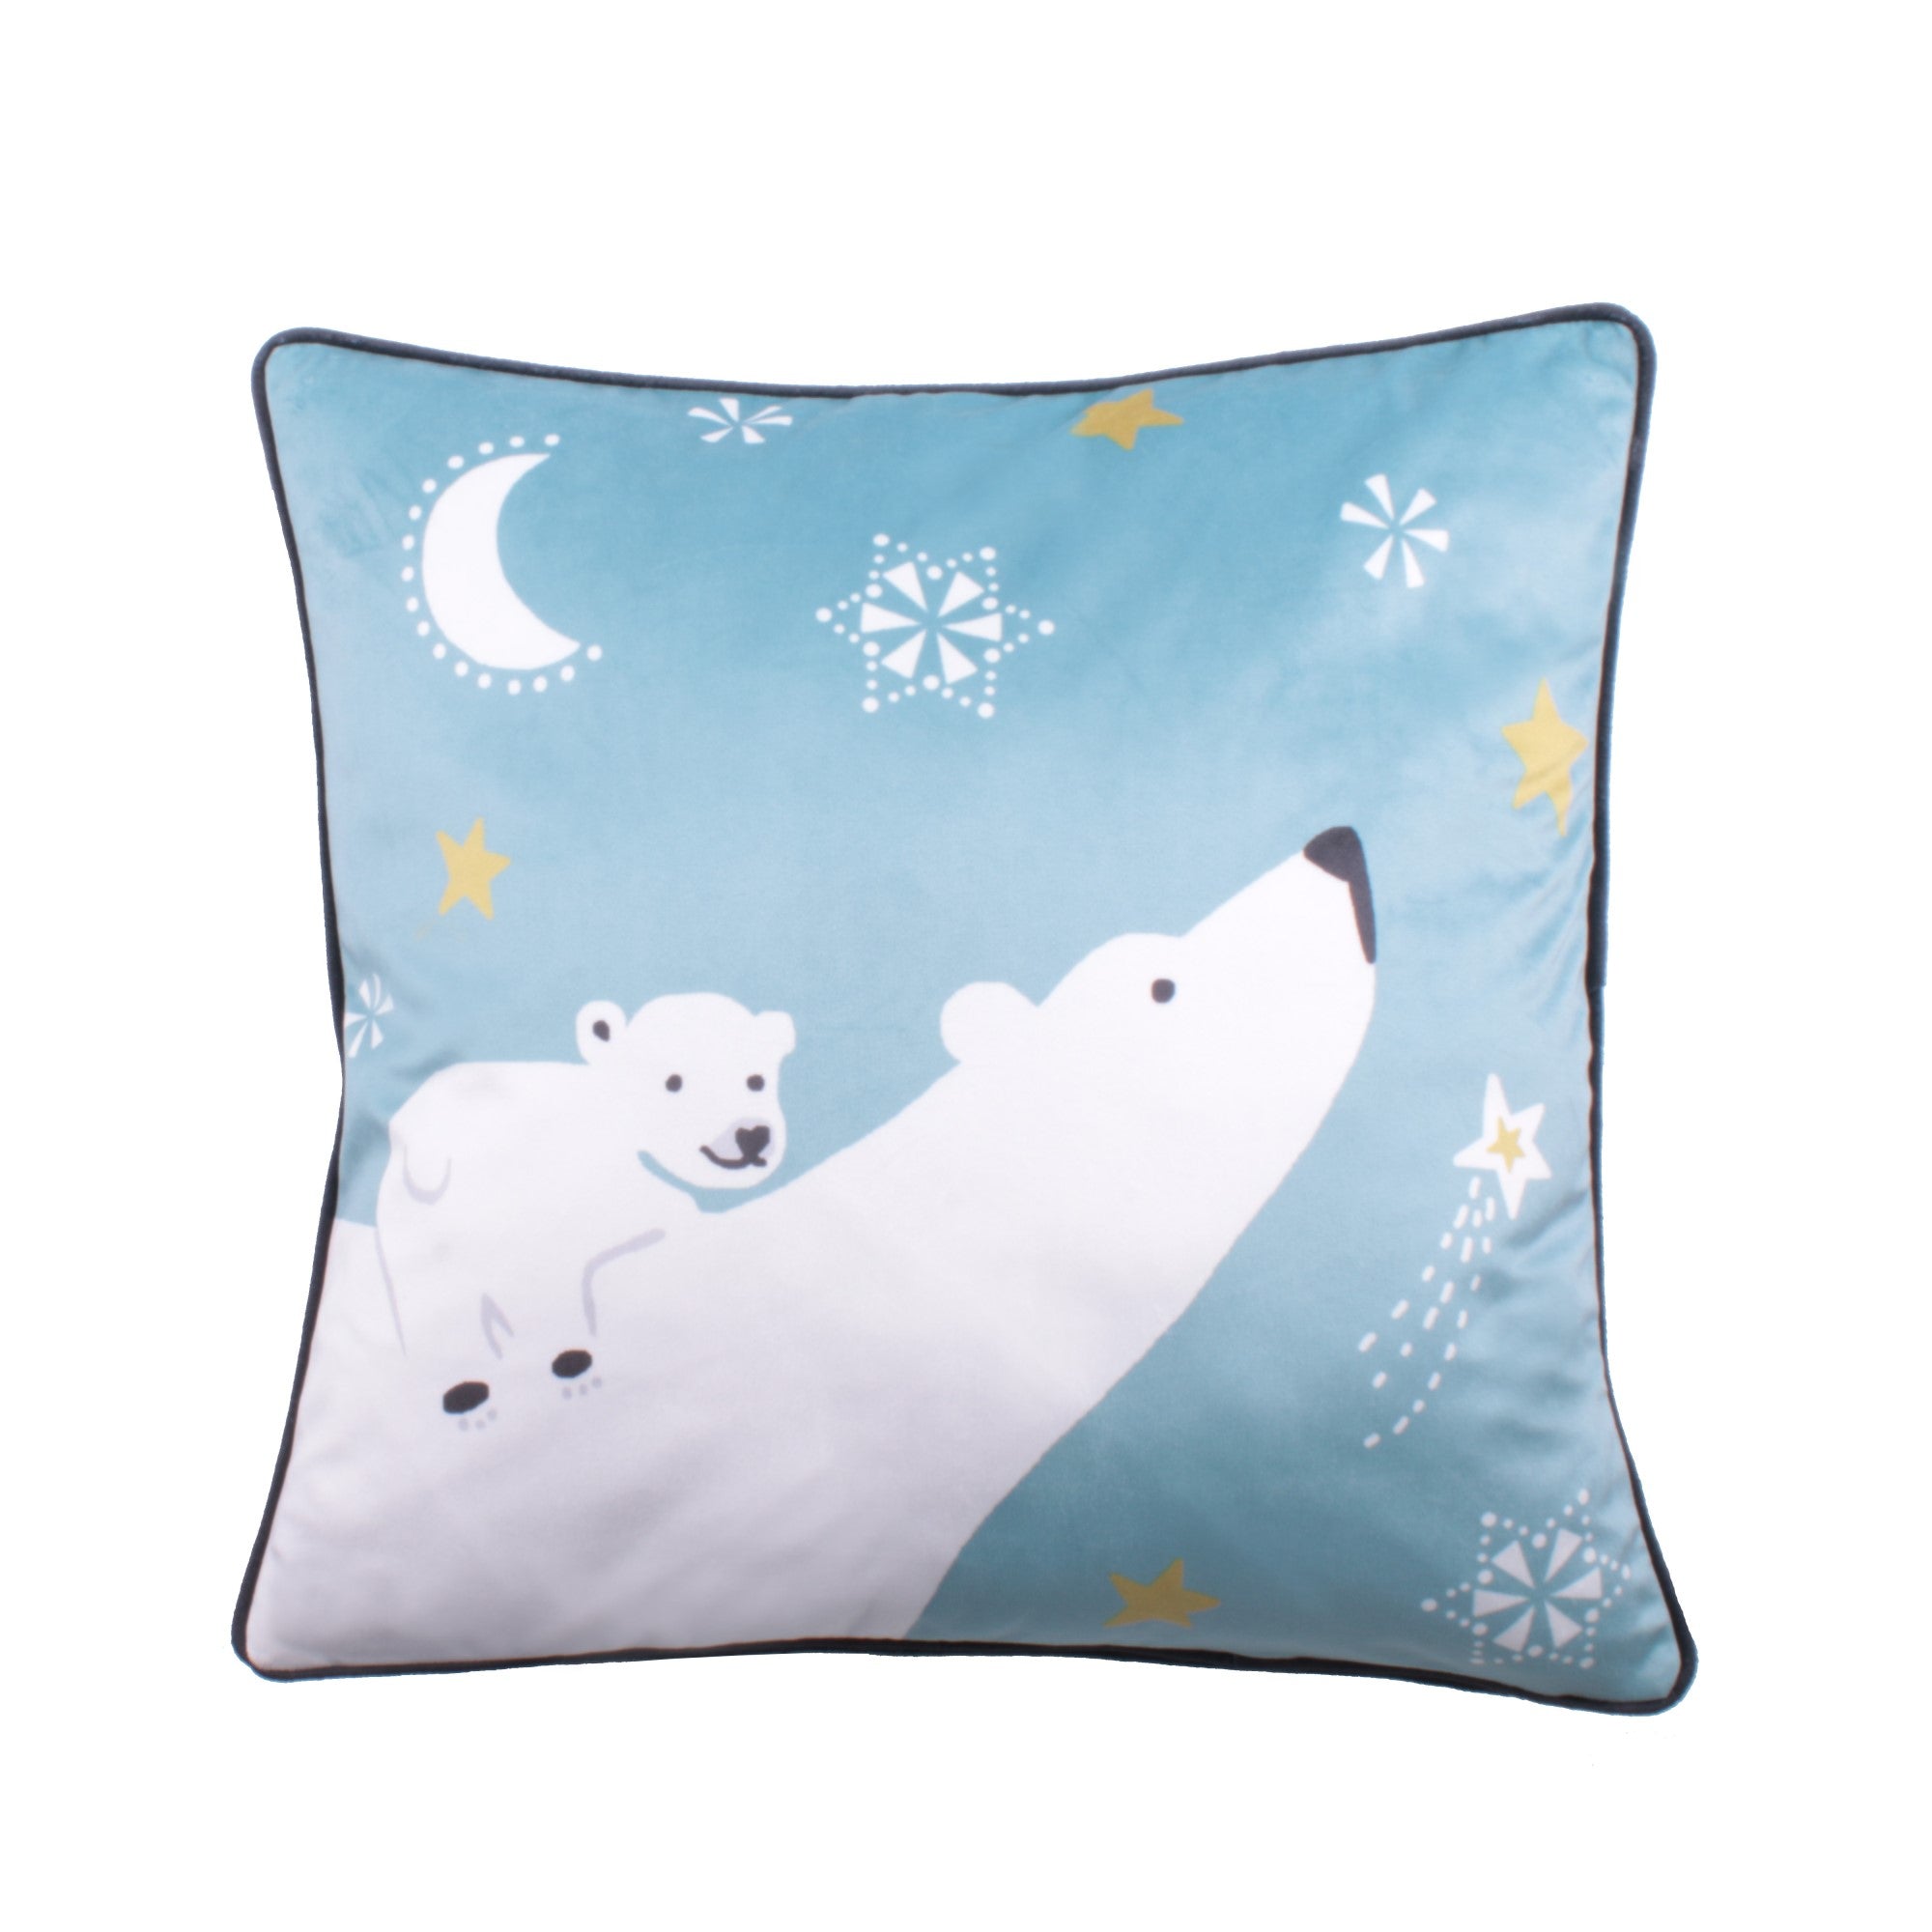 Cushion Cover Starry Night by Fusion in Blue